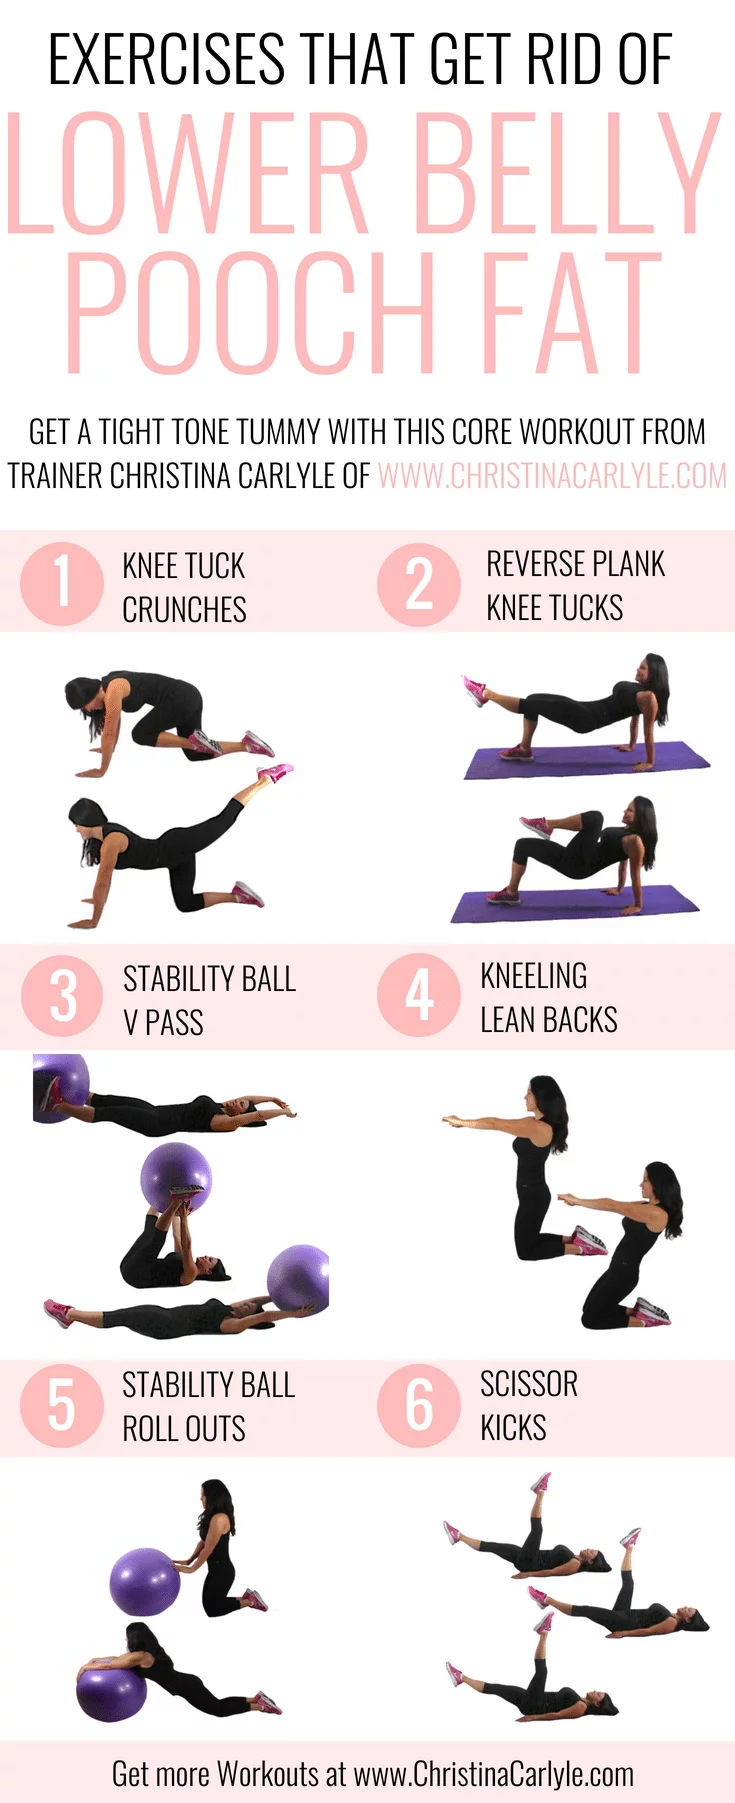 Exercise To Get Rid Of Belly Flap - Exercise Poster